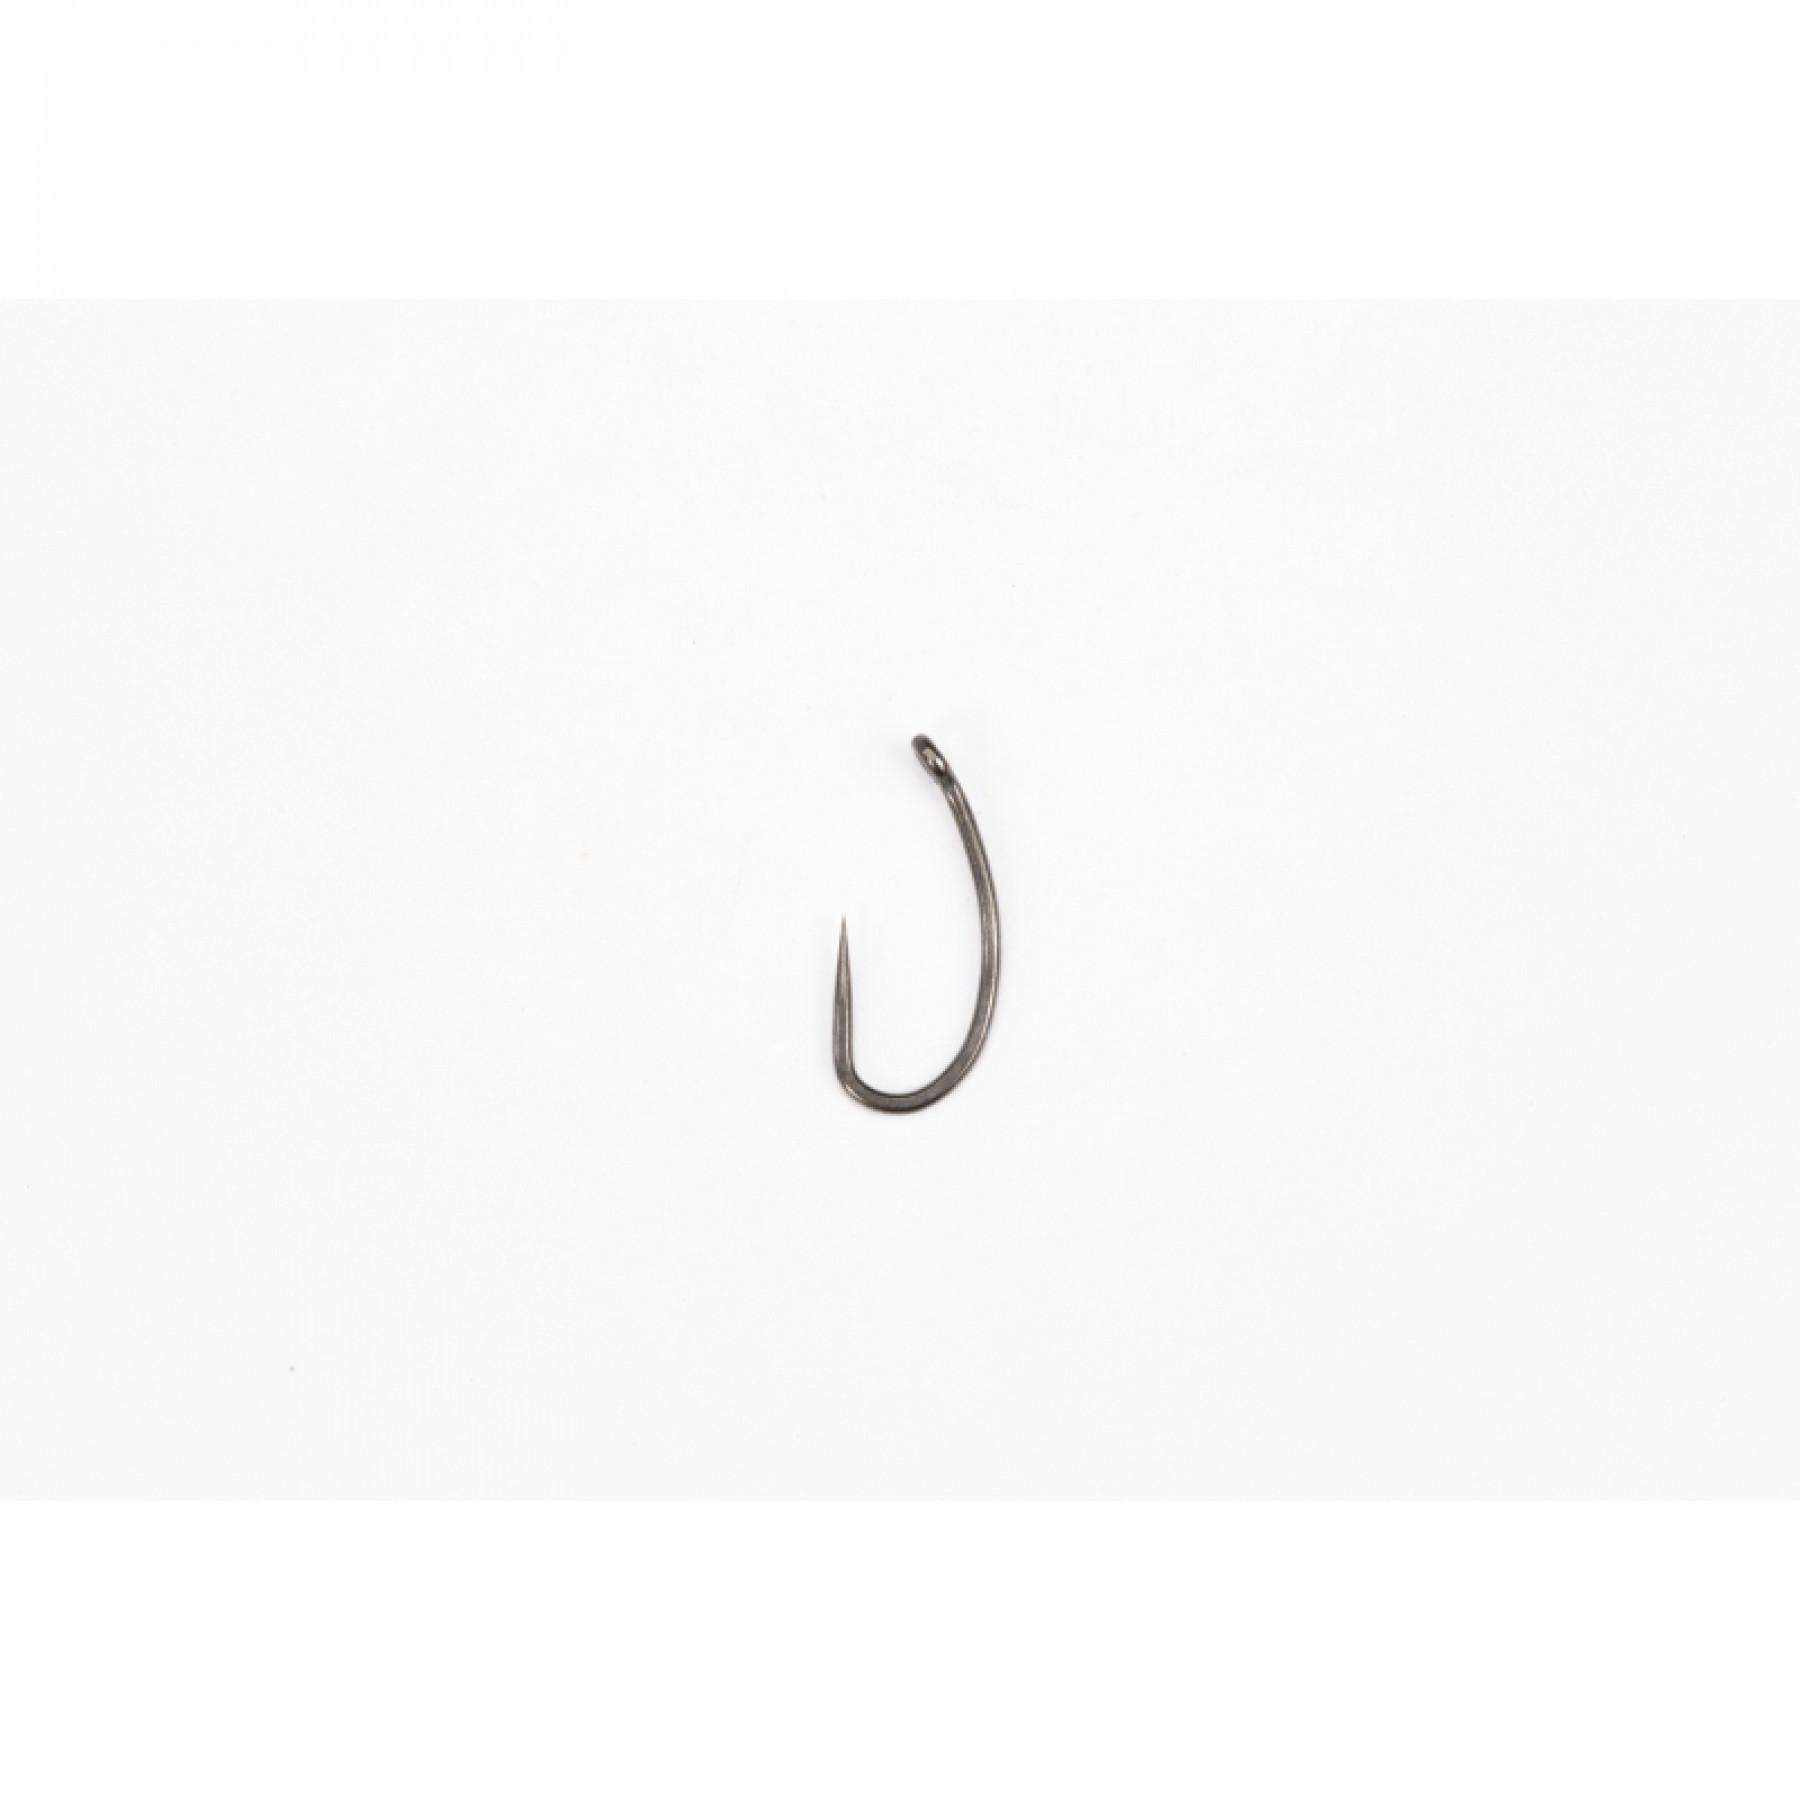 Hak Pinpoint Fang X taille 6 Micro Barbed